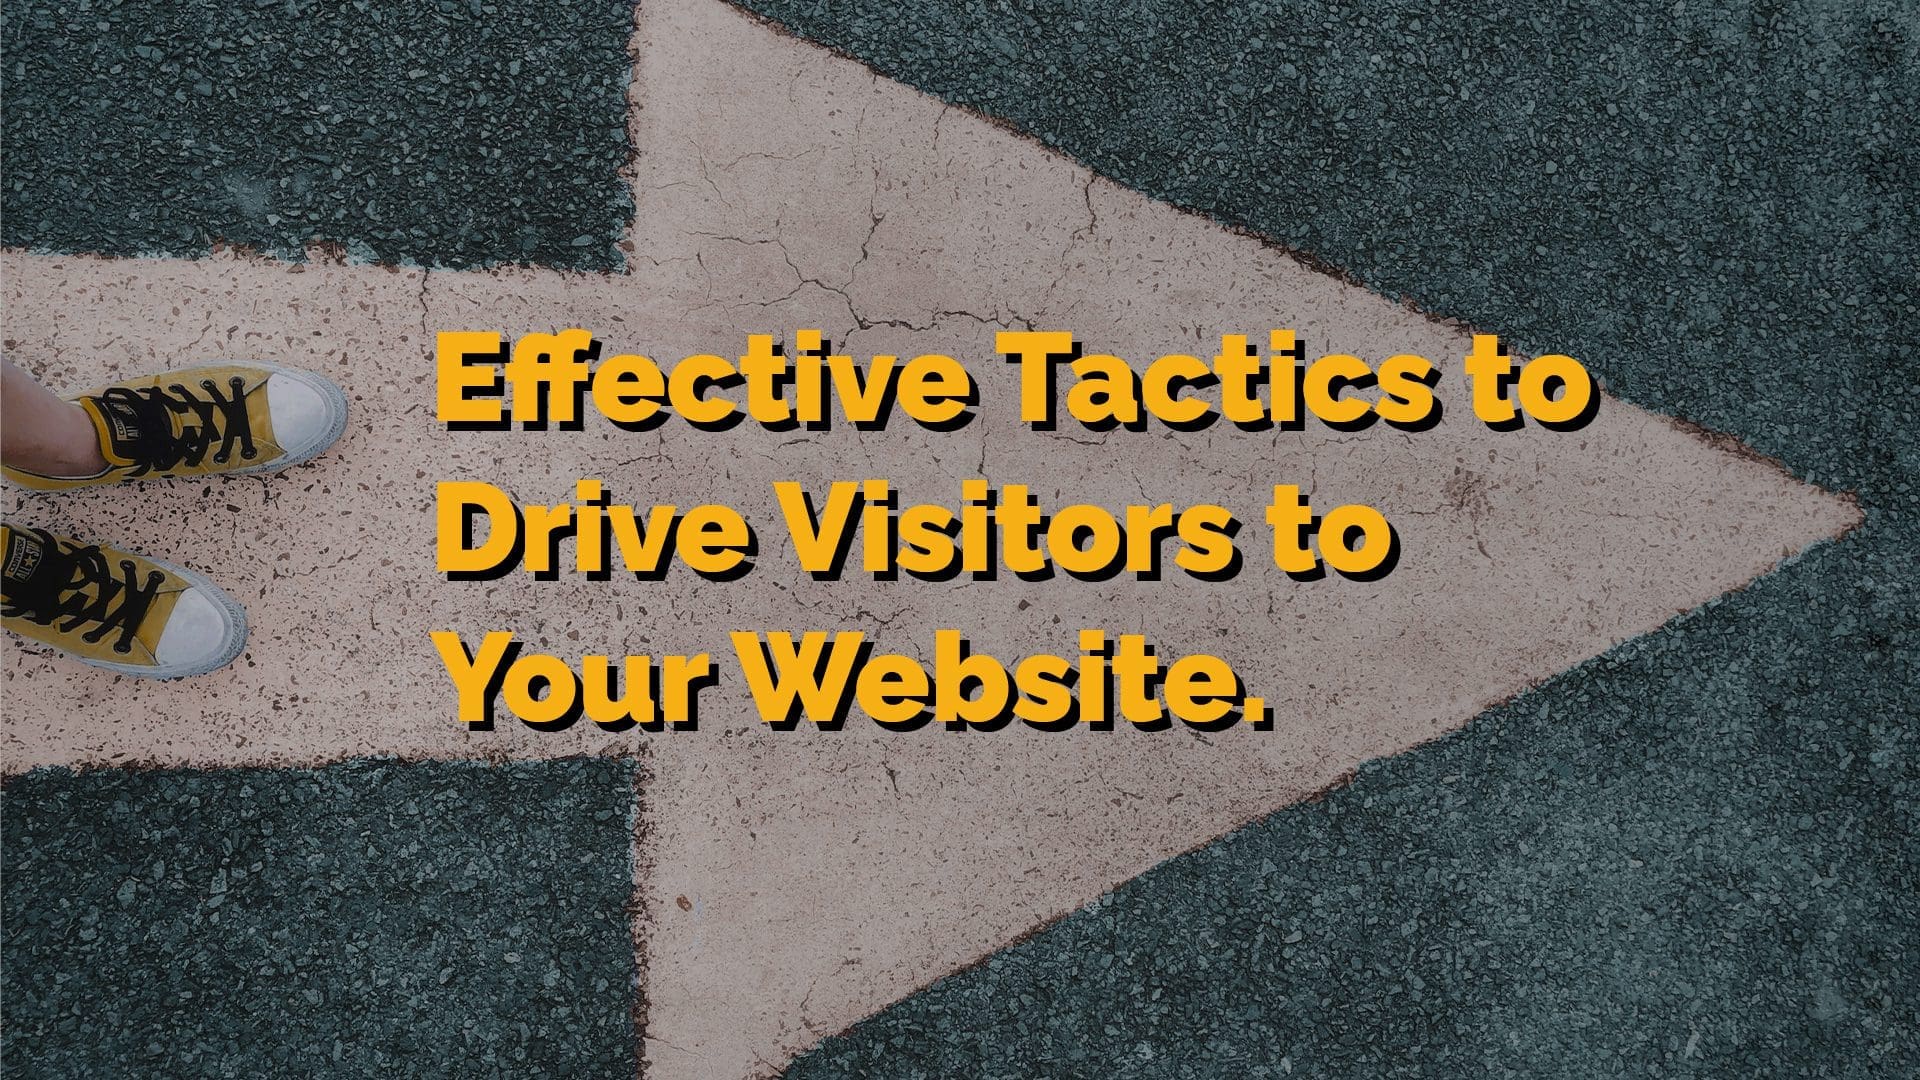 Effective Tactics to Drive More Visitors to Your Website